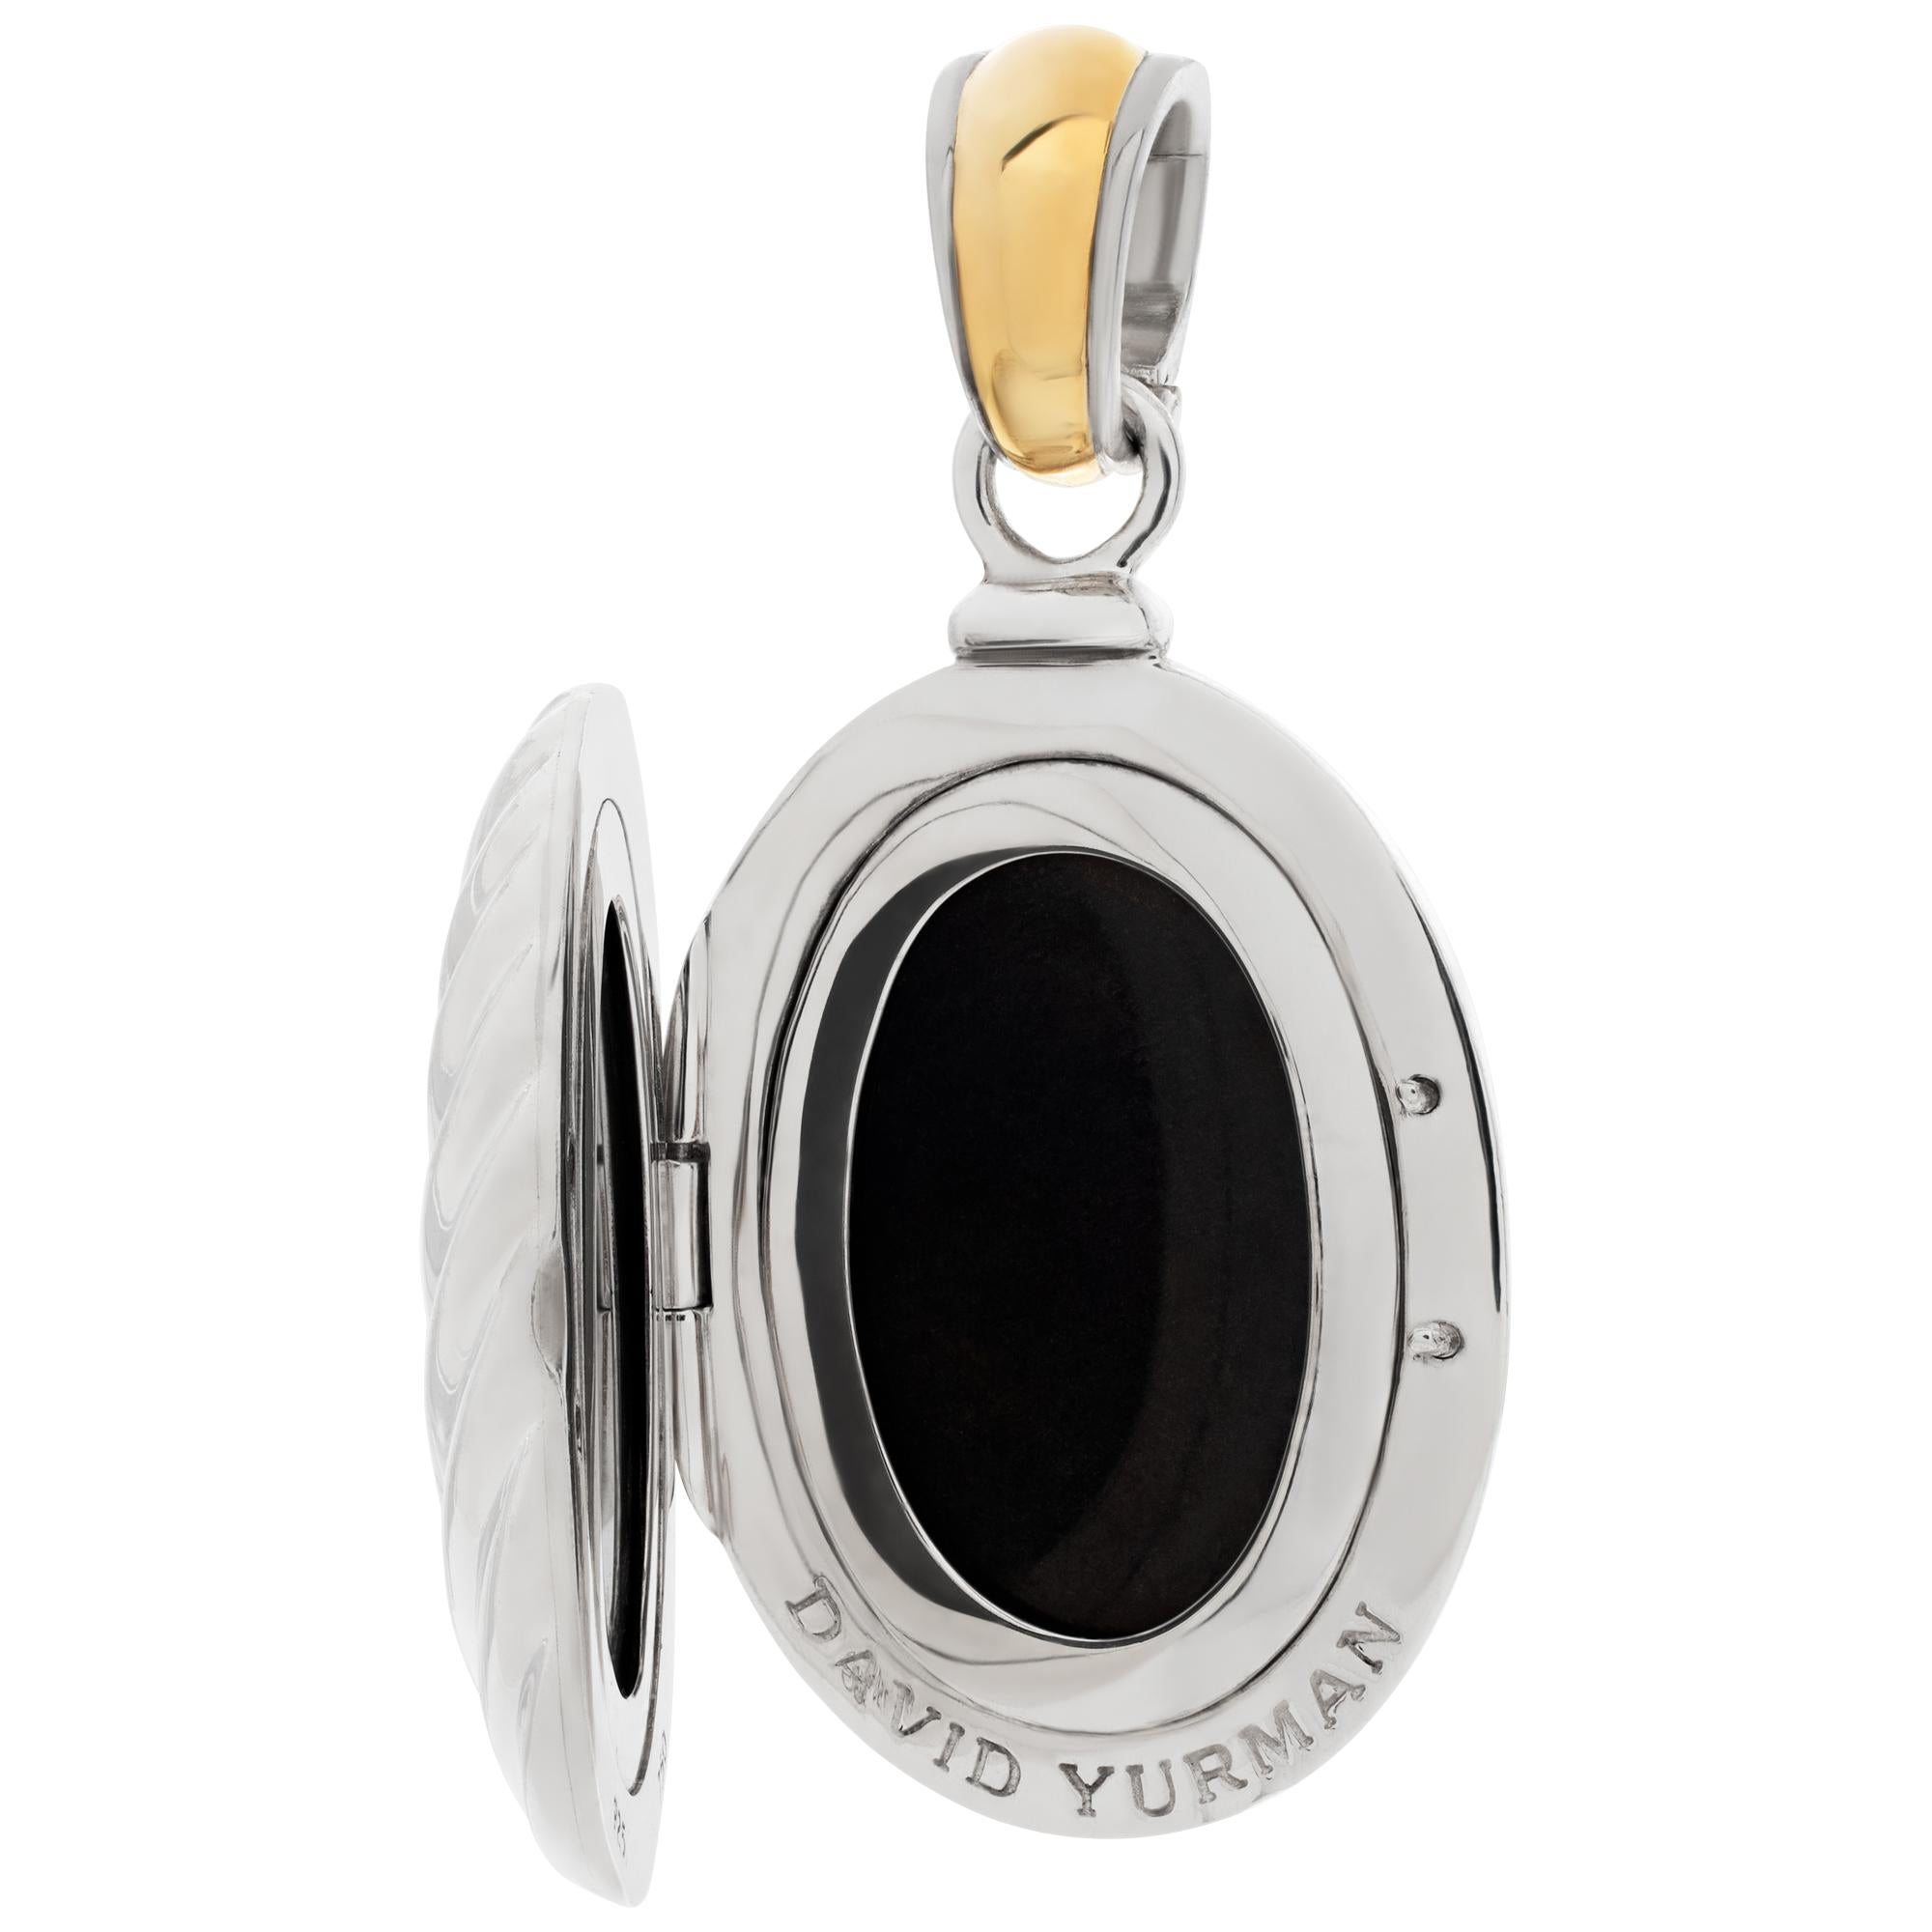 David Yurman locket pendant in 925 sterling silver and 18k yellow gold with cable pattern with hinged bale. Lenght is 57 mm and picture opening is 24 mm x 16 mm.
